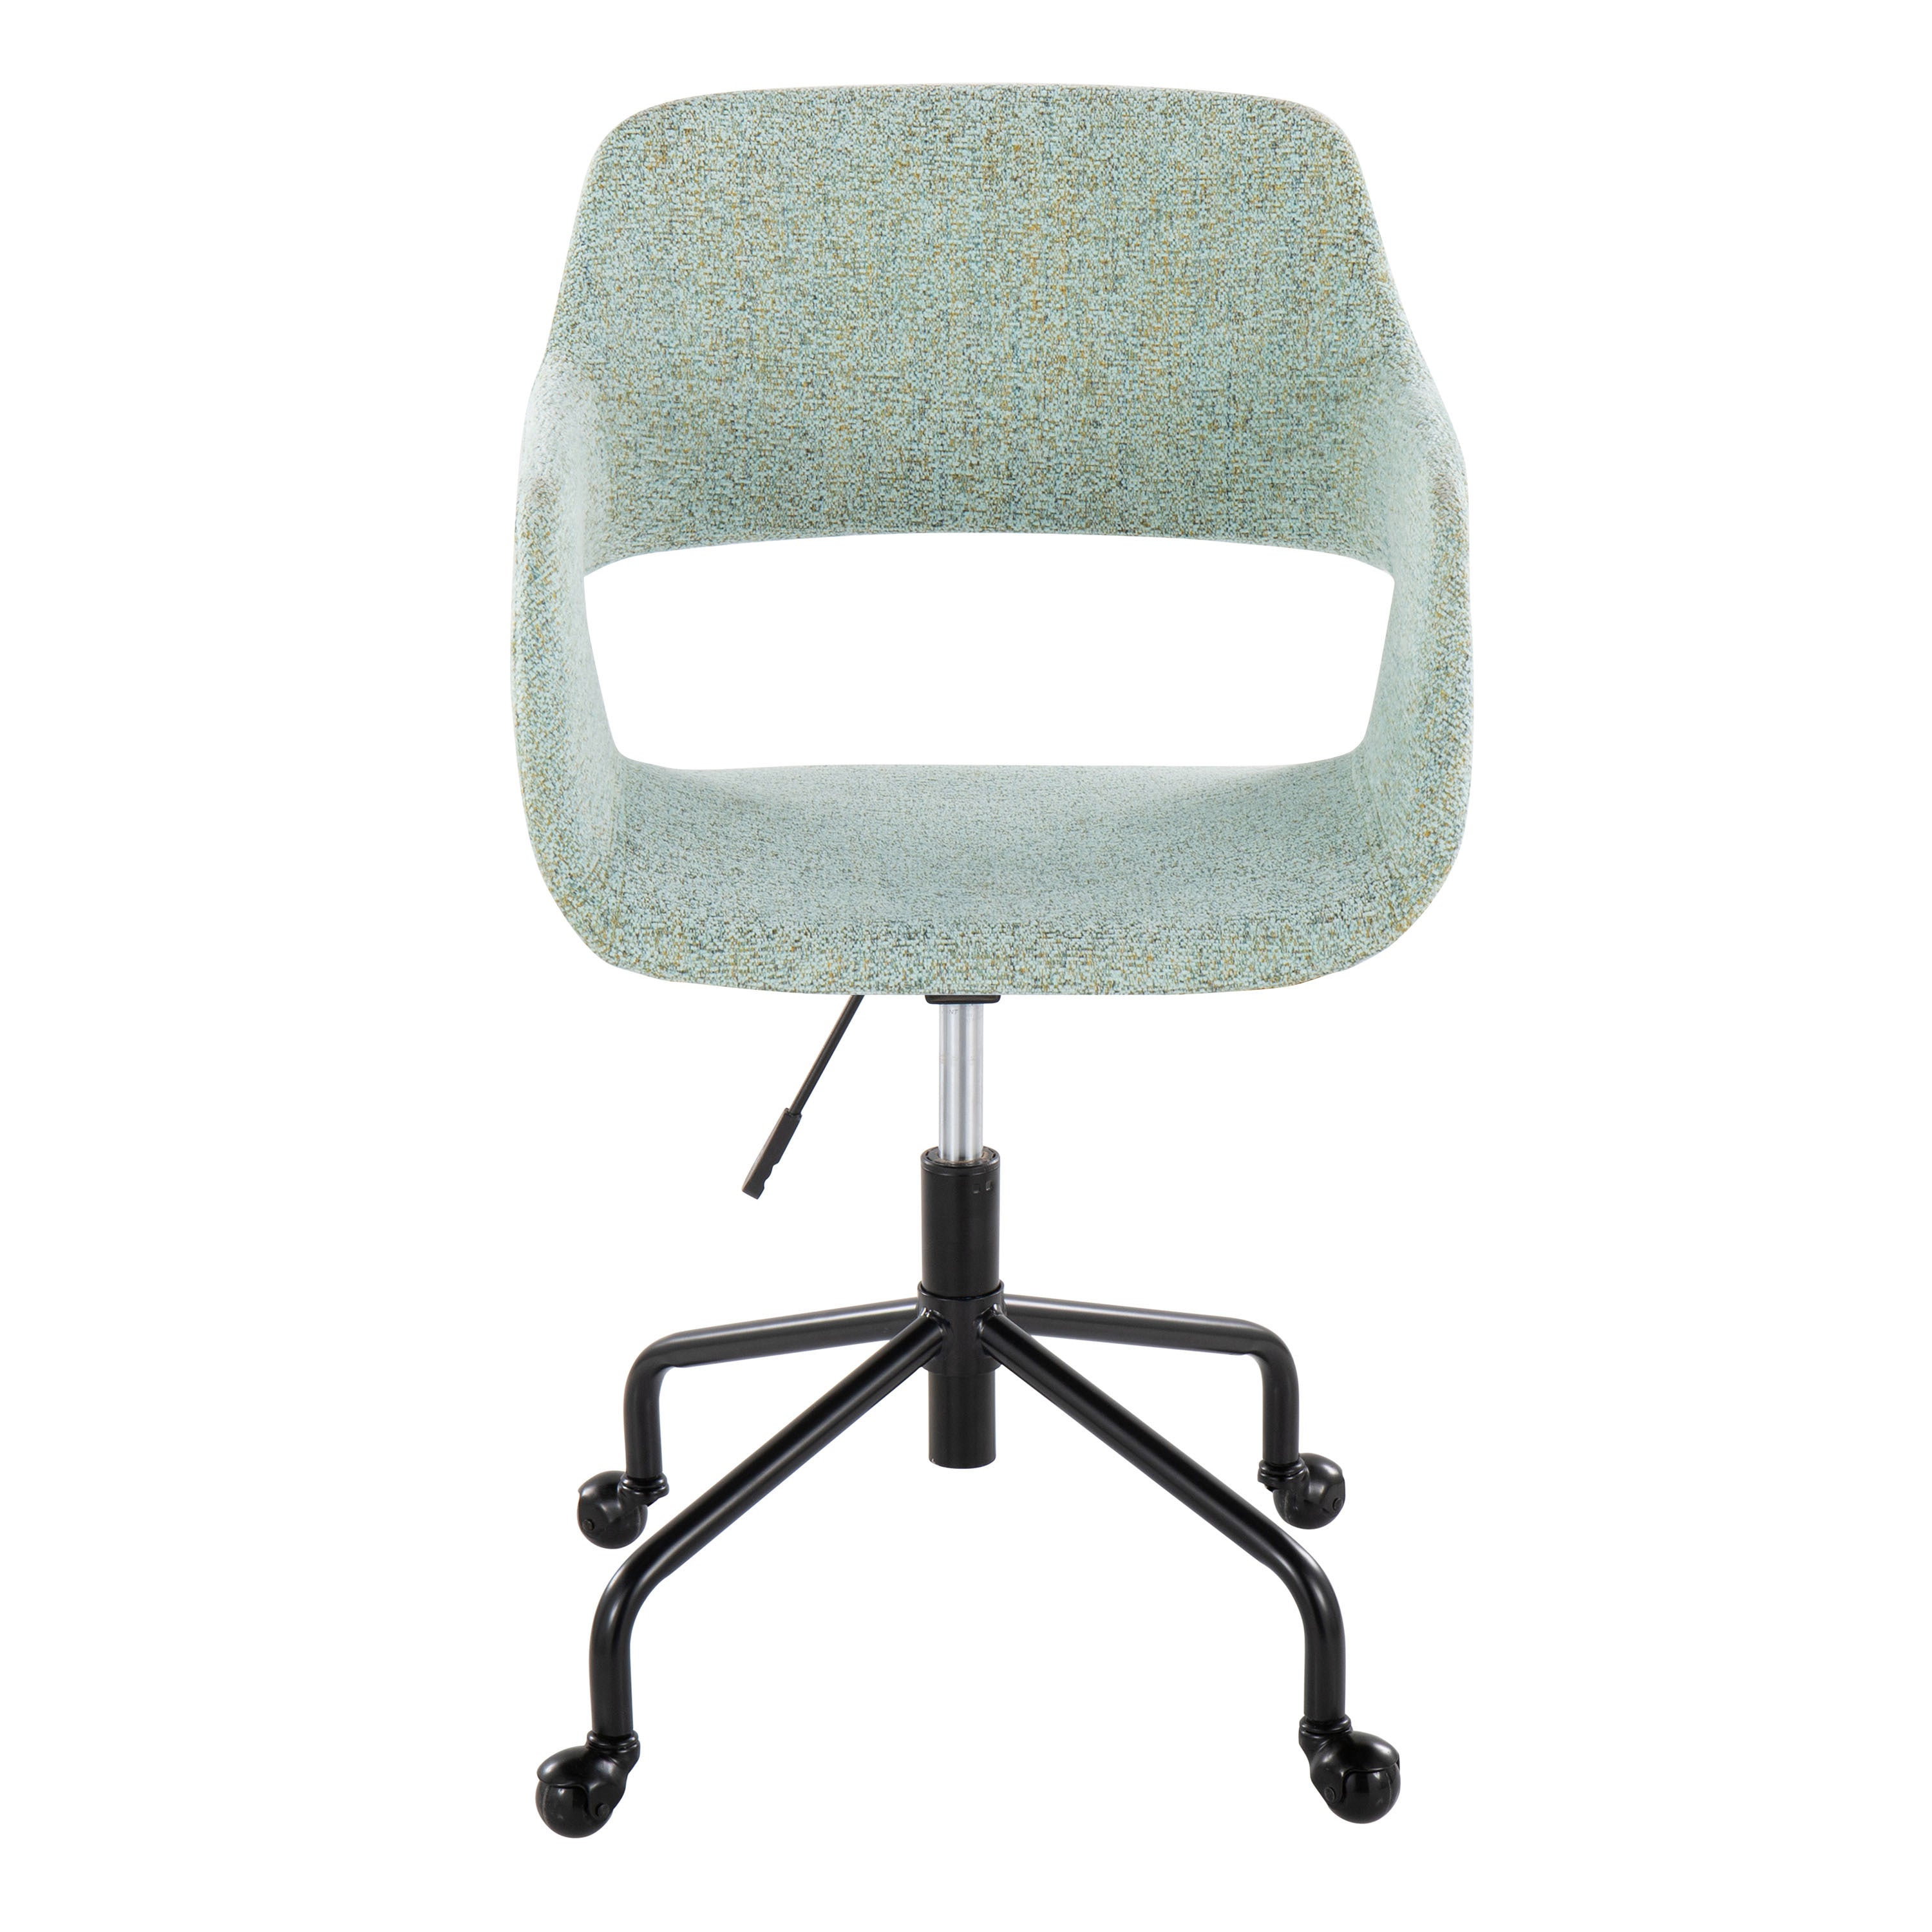 Contemporary Adjustable Office Chair - Black Metal and Light Green